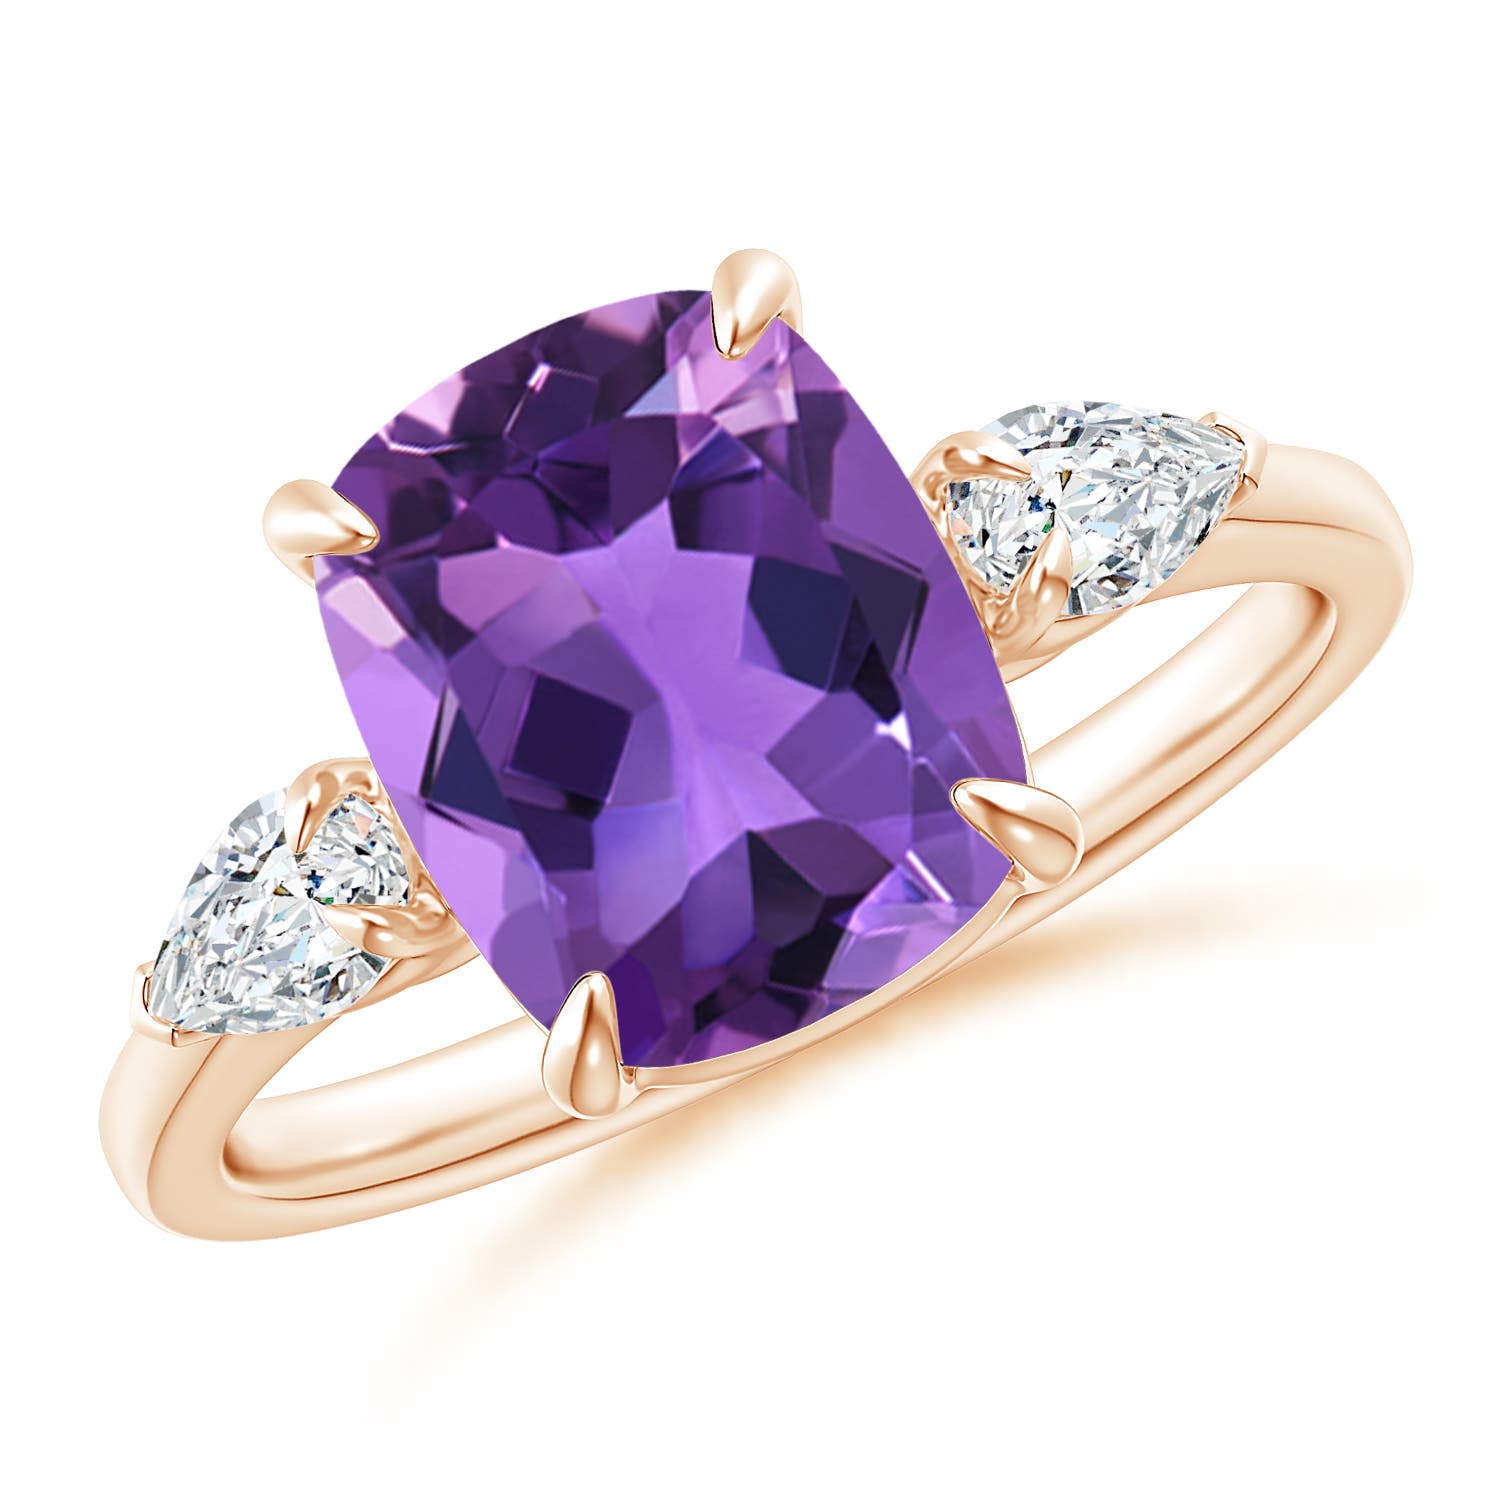 AAA - Amethyst / 3.1 CT / 14 KT Rose Gold